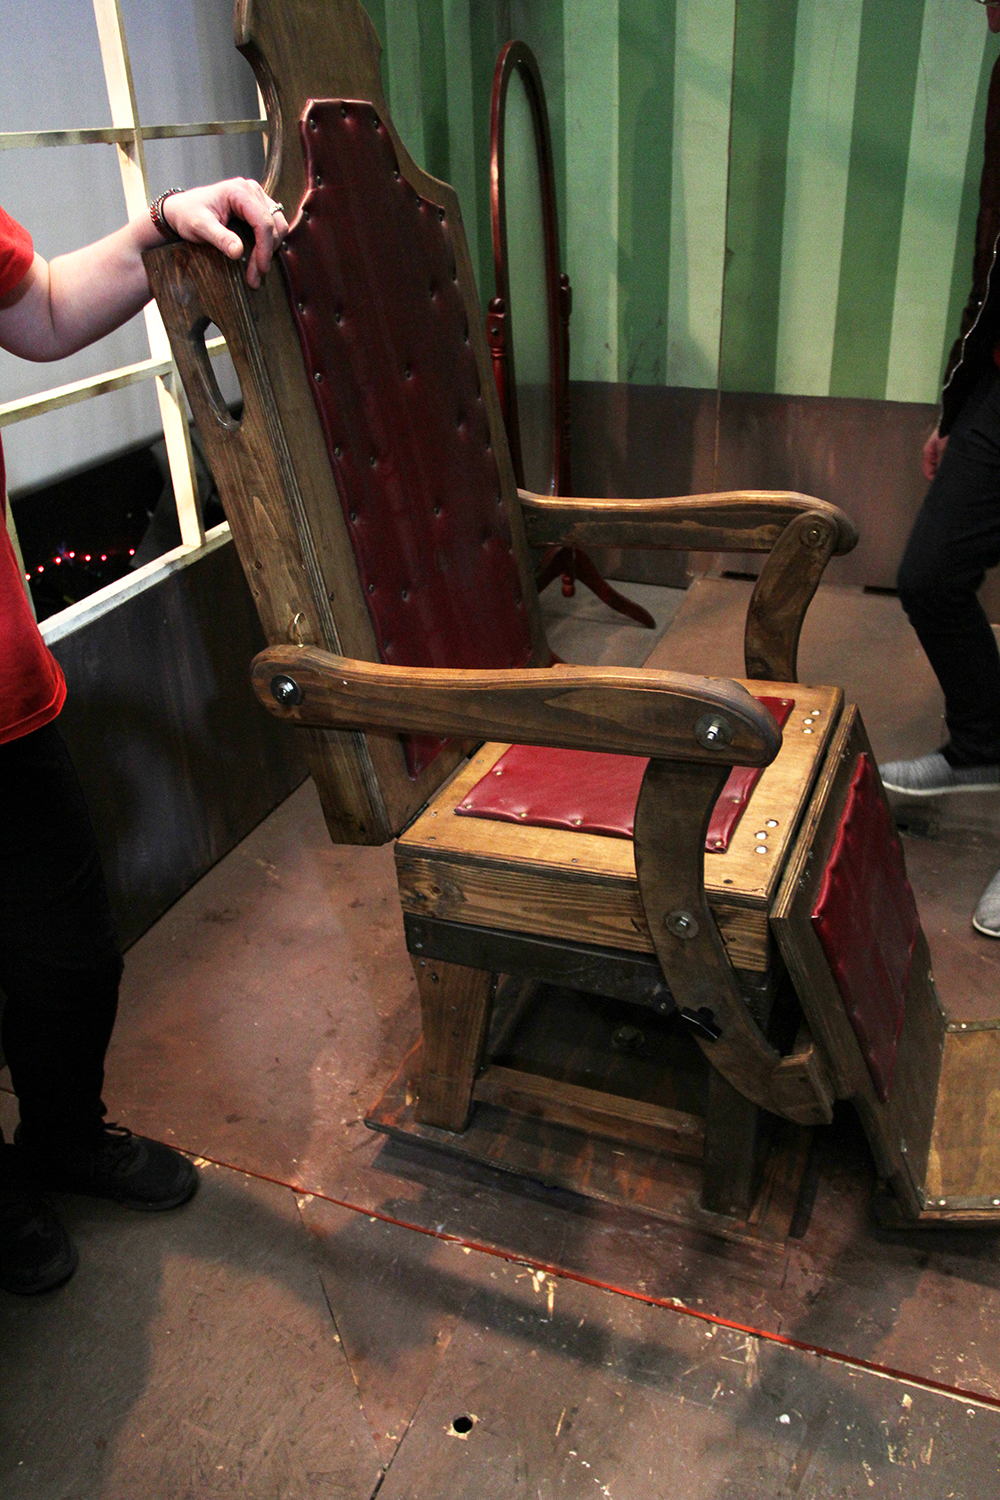 Built in 6 weeks, the chair swivels, dips, and locks back into place. Eerily realistic.